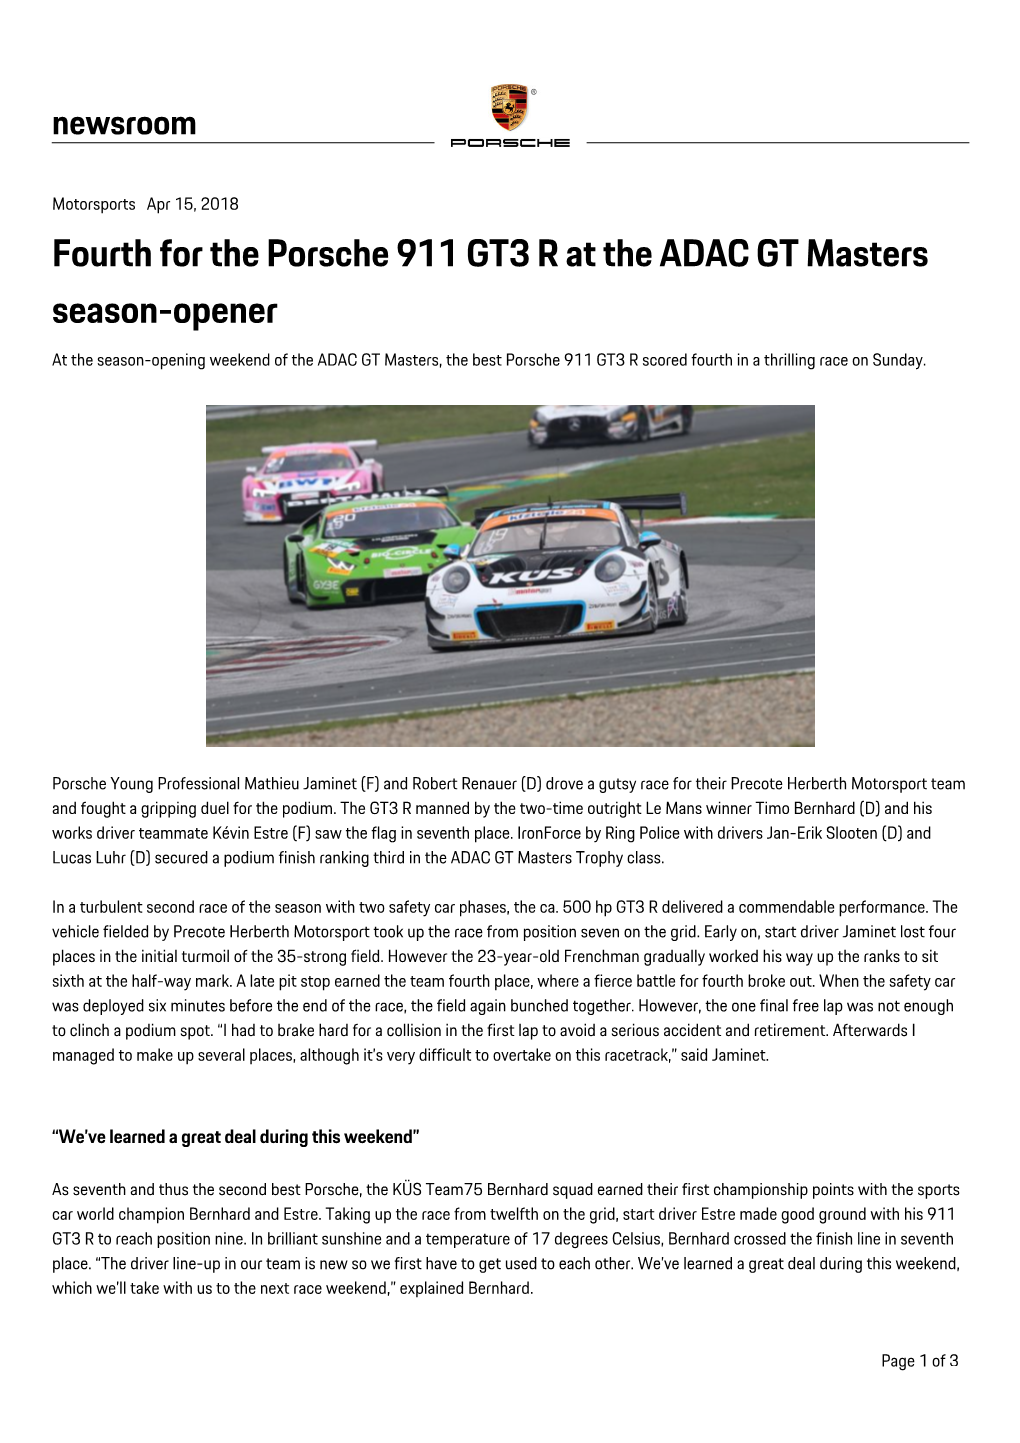 Fourth for the Porsche 911 GT3 R at the ADAC GT Masters Season-Opener